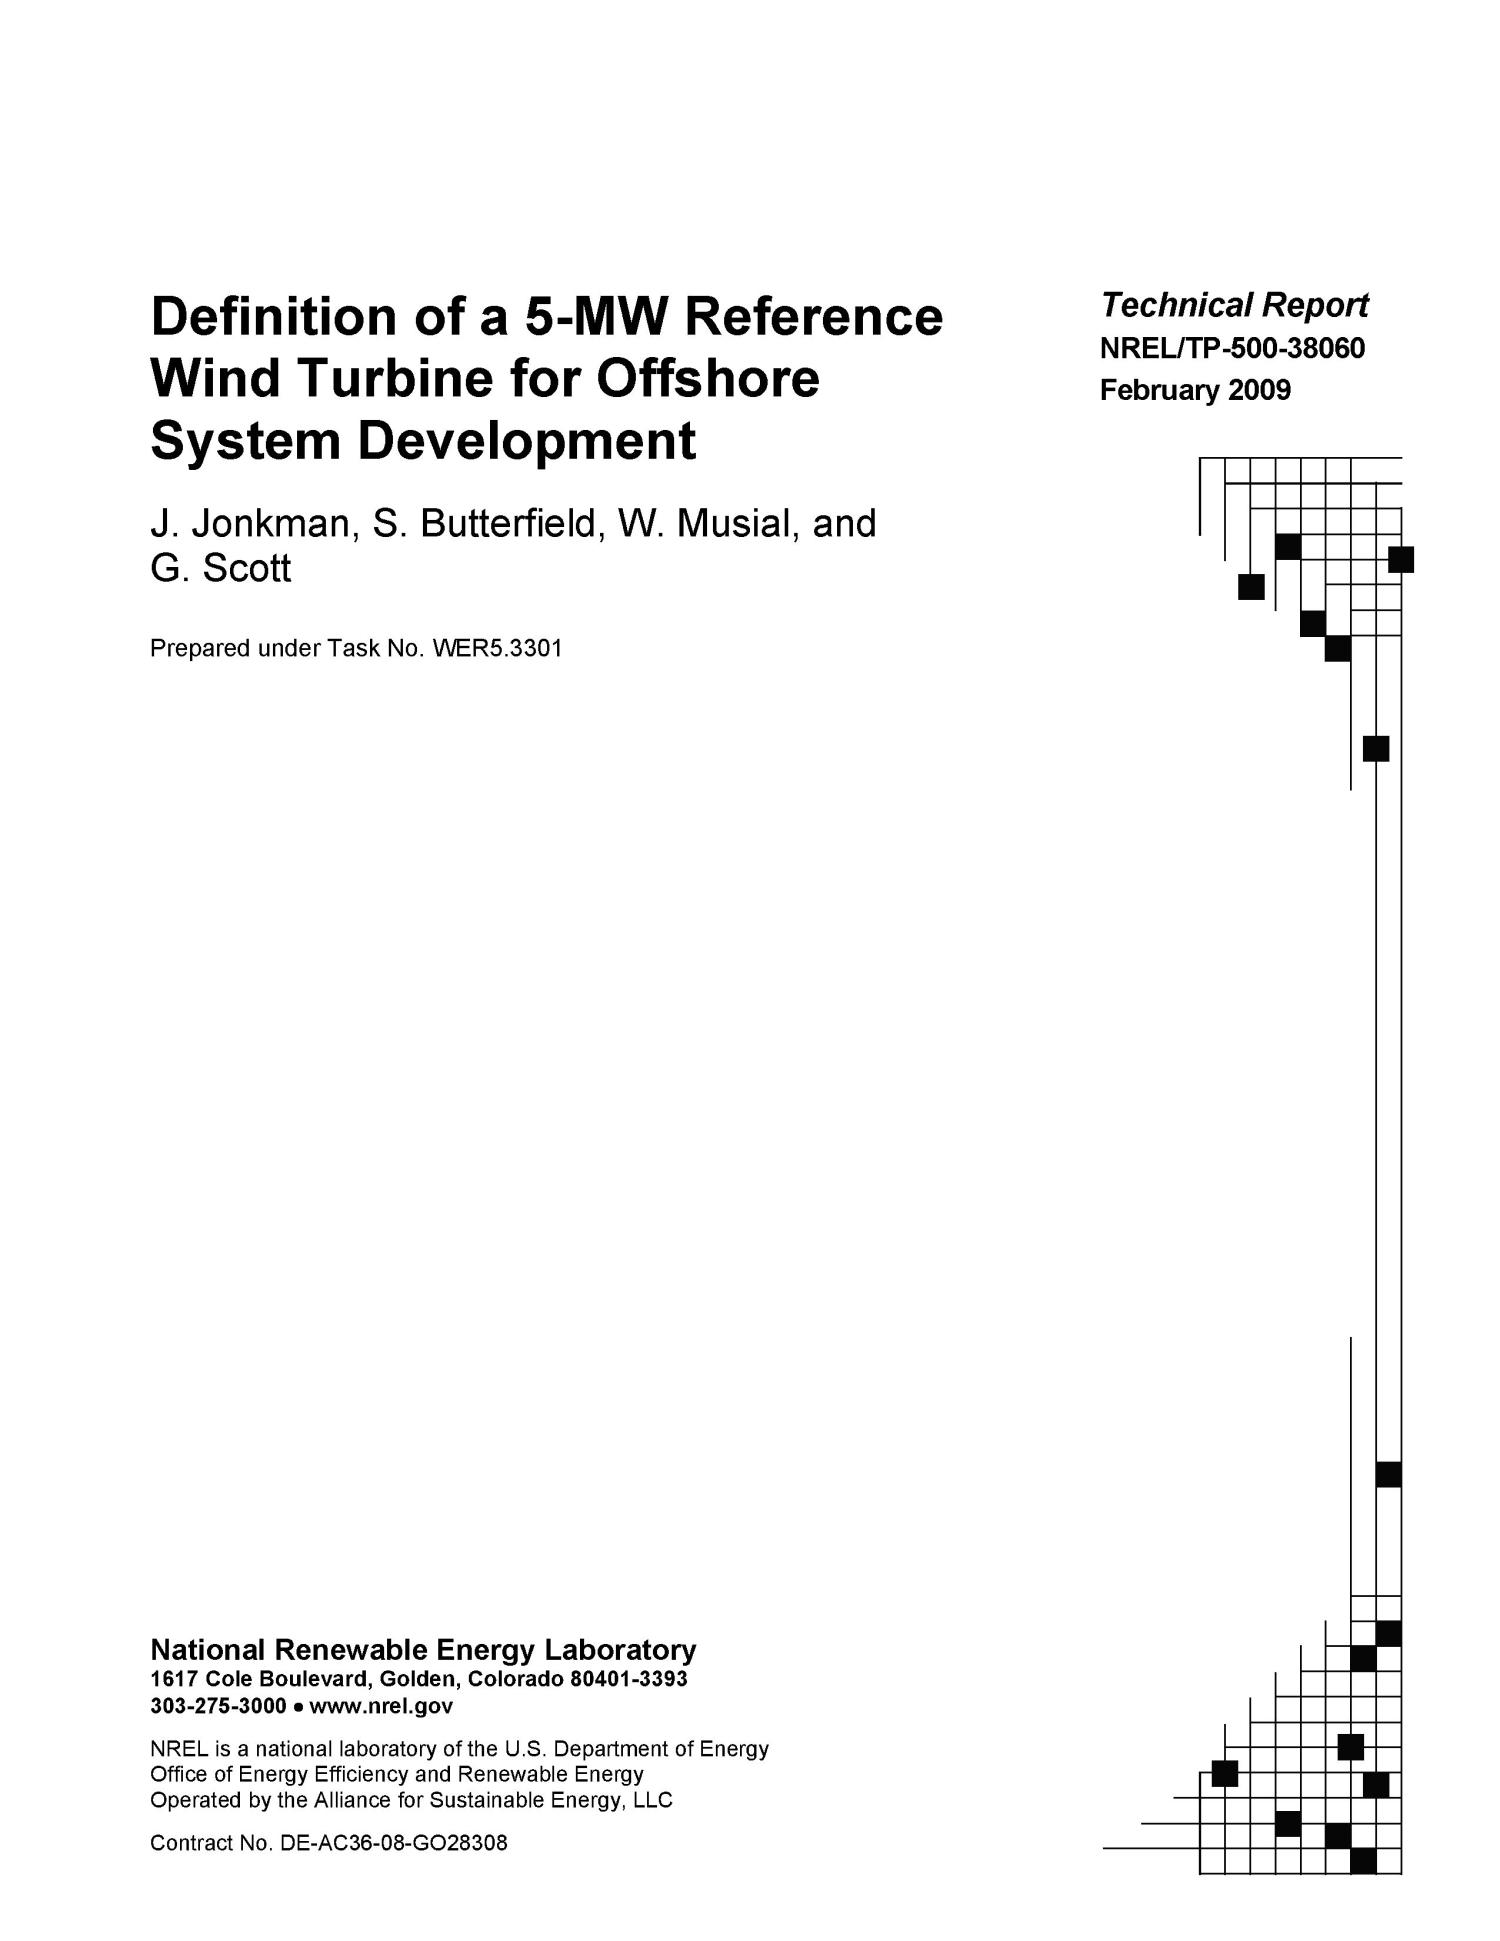 Definition of a 5-MW Reference Wind Turbine for Offshore System Development
                                                
                                                    [Sequence #]: 2 of 75
                                                